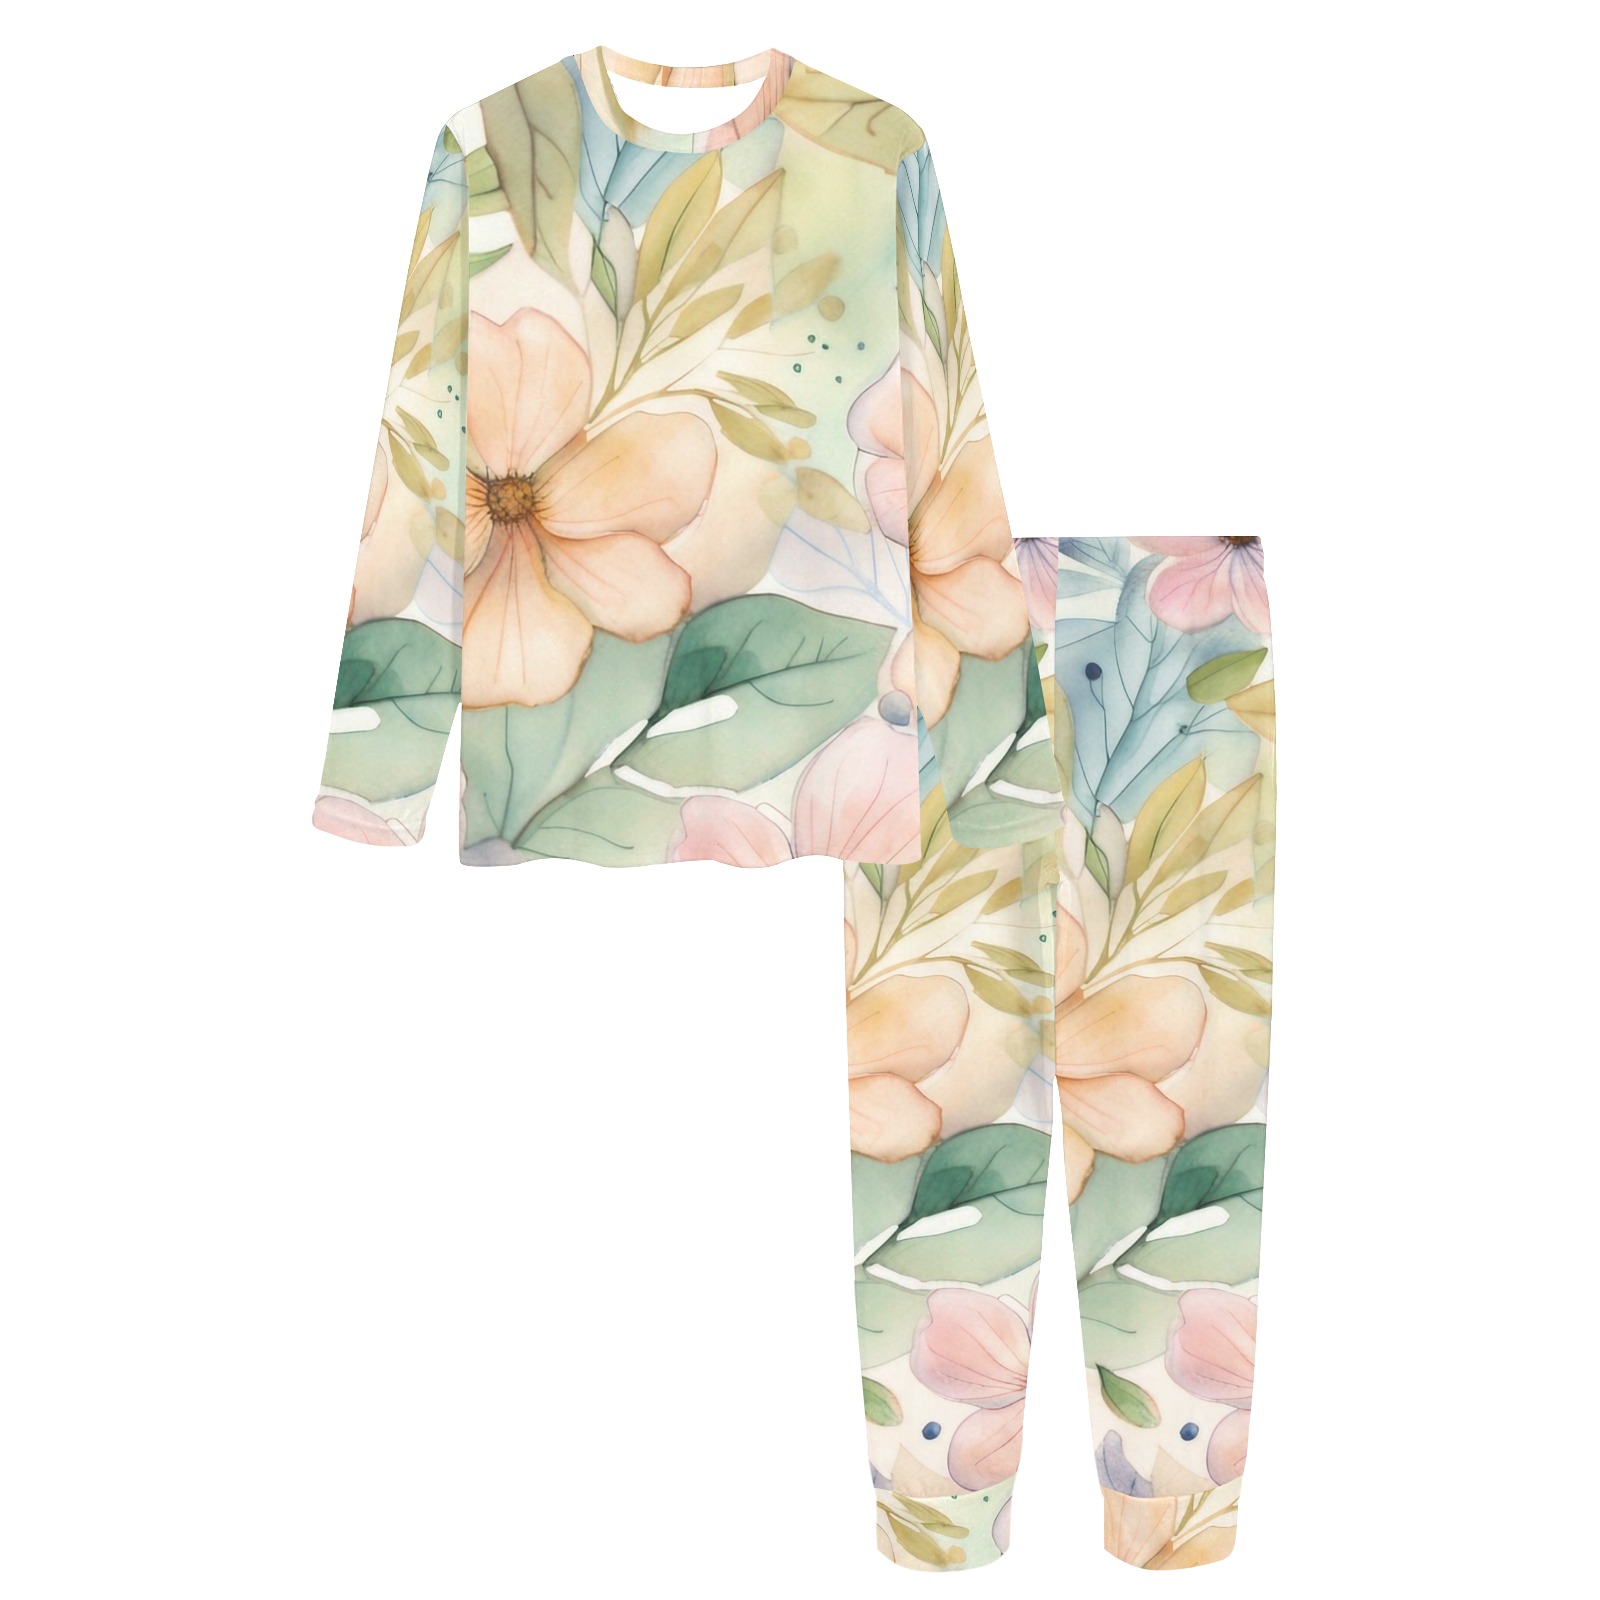 Watercolor Floral 1 Women's All Over Print Pajama Set